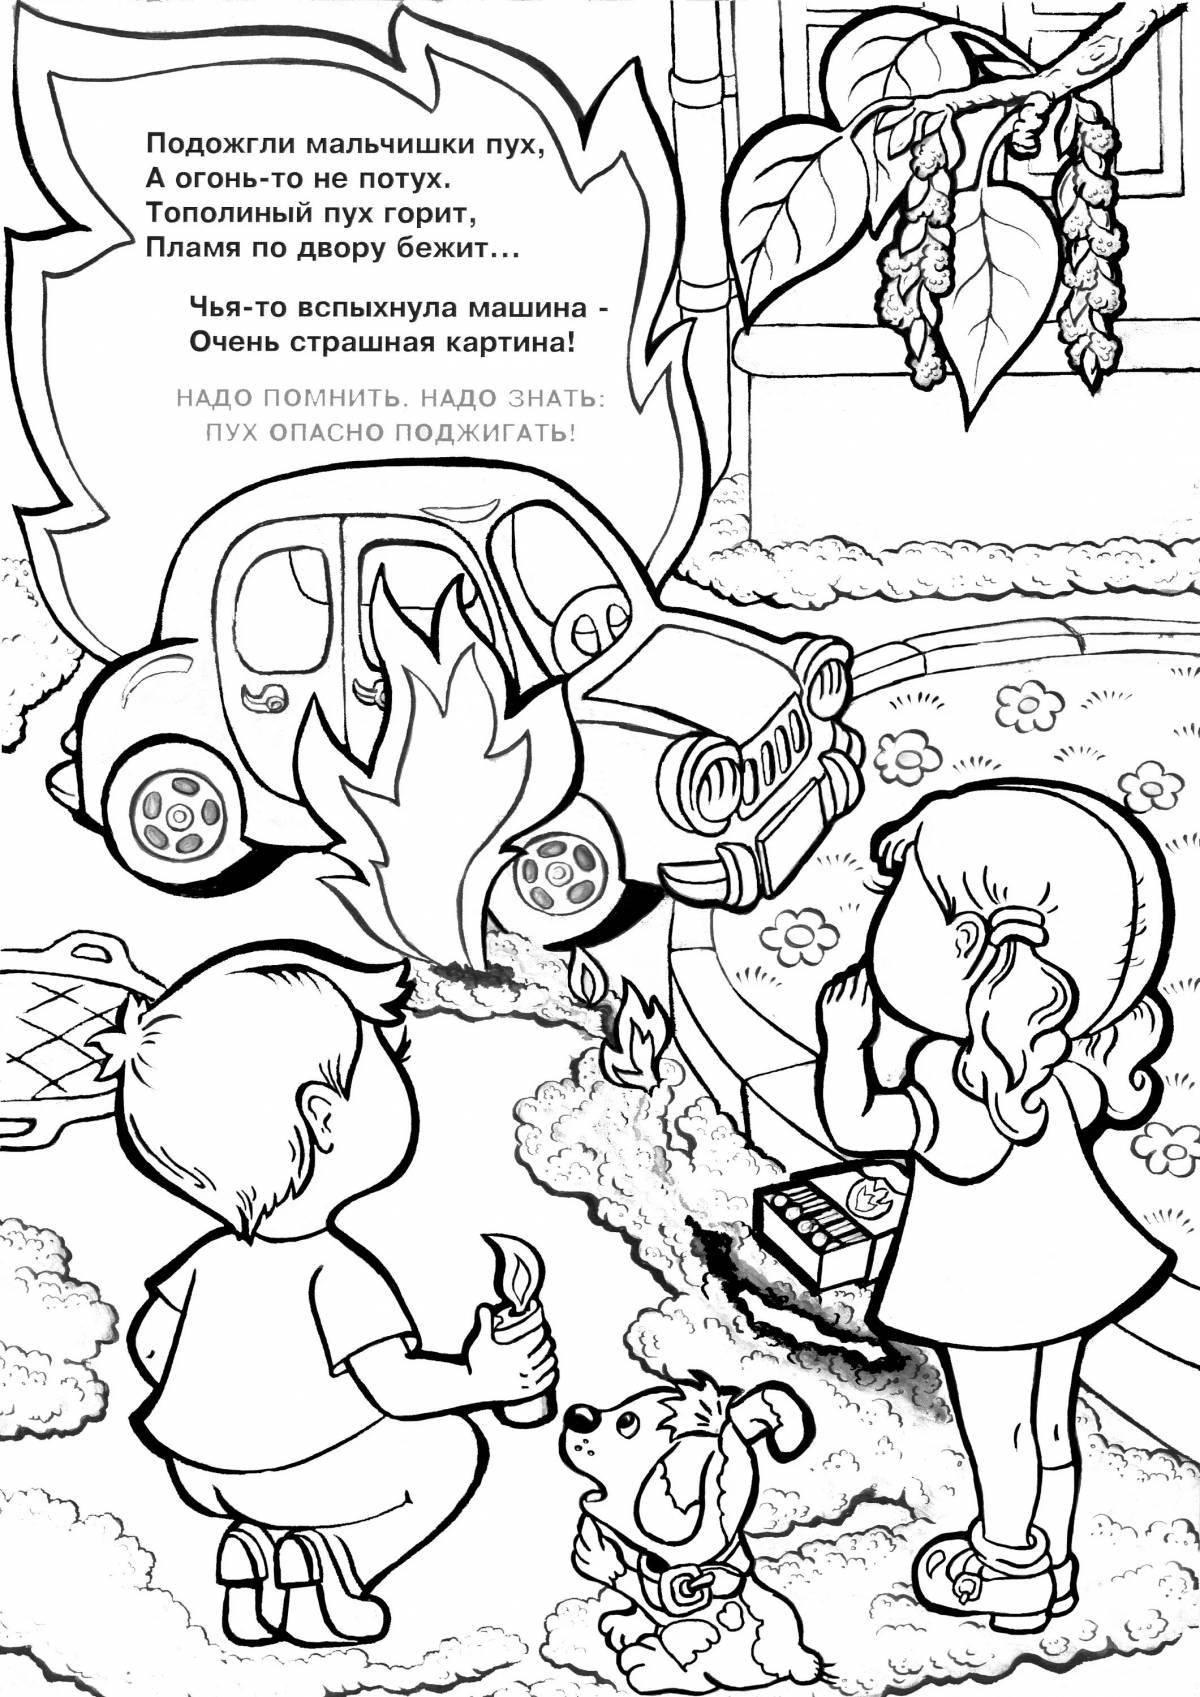 Colorful fire safety coloring page for 6-7 year olds